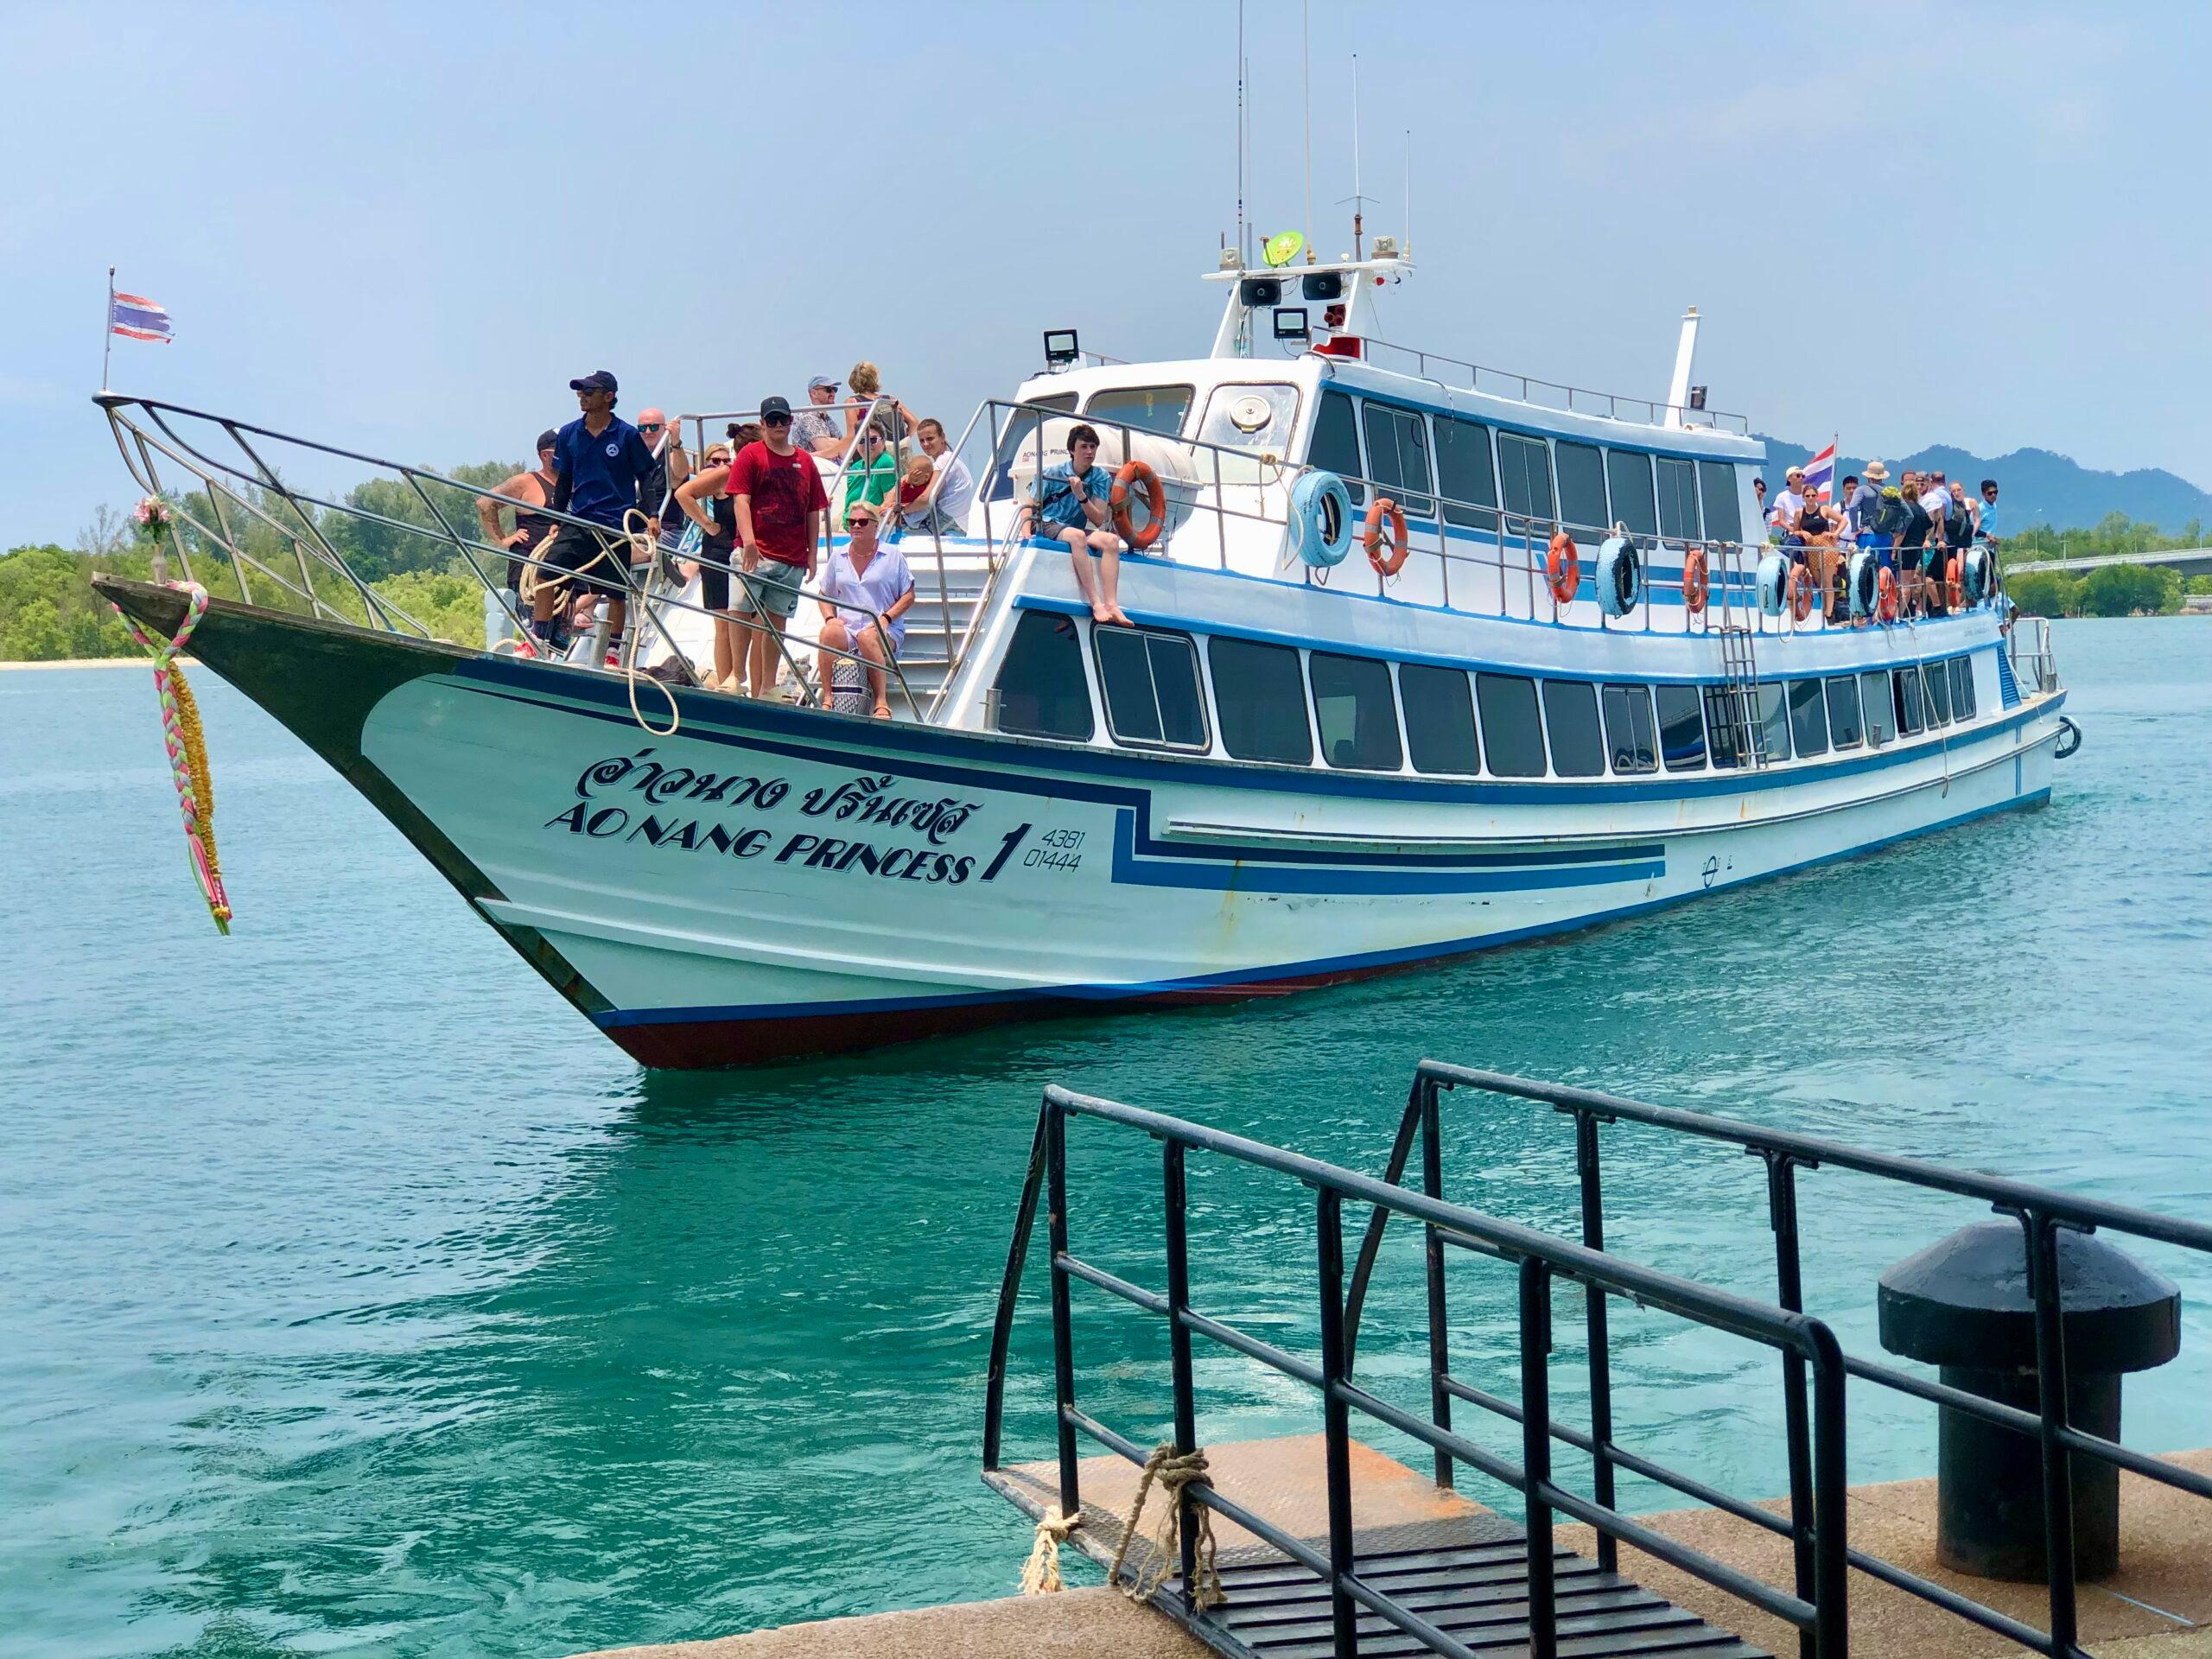 Review : Getting the ferry from Koh Lanta to krabi